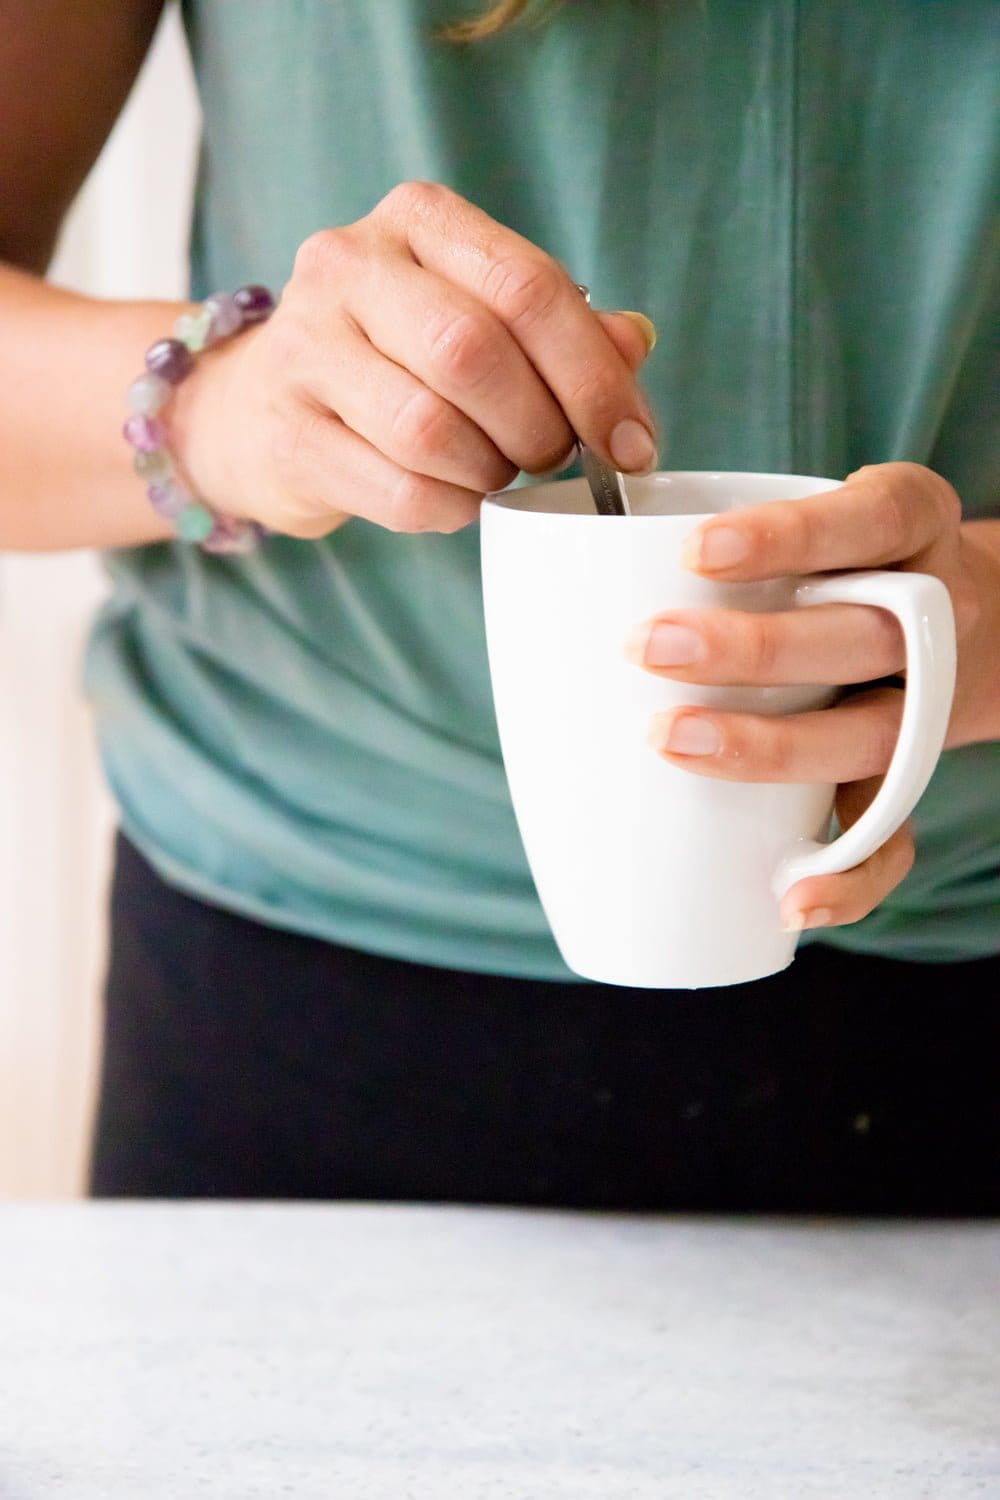 Hands holding a white mug and a spoon. The person is wearing a green shirt and a bracelet.